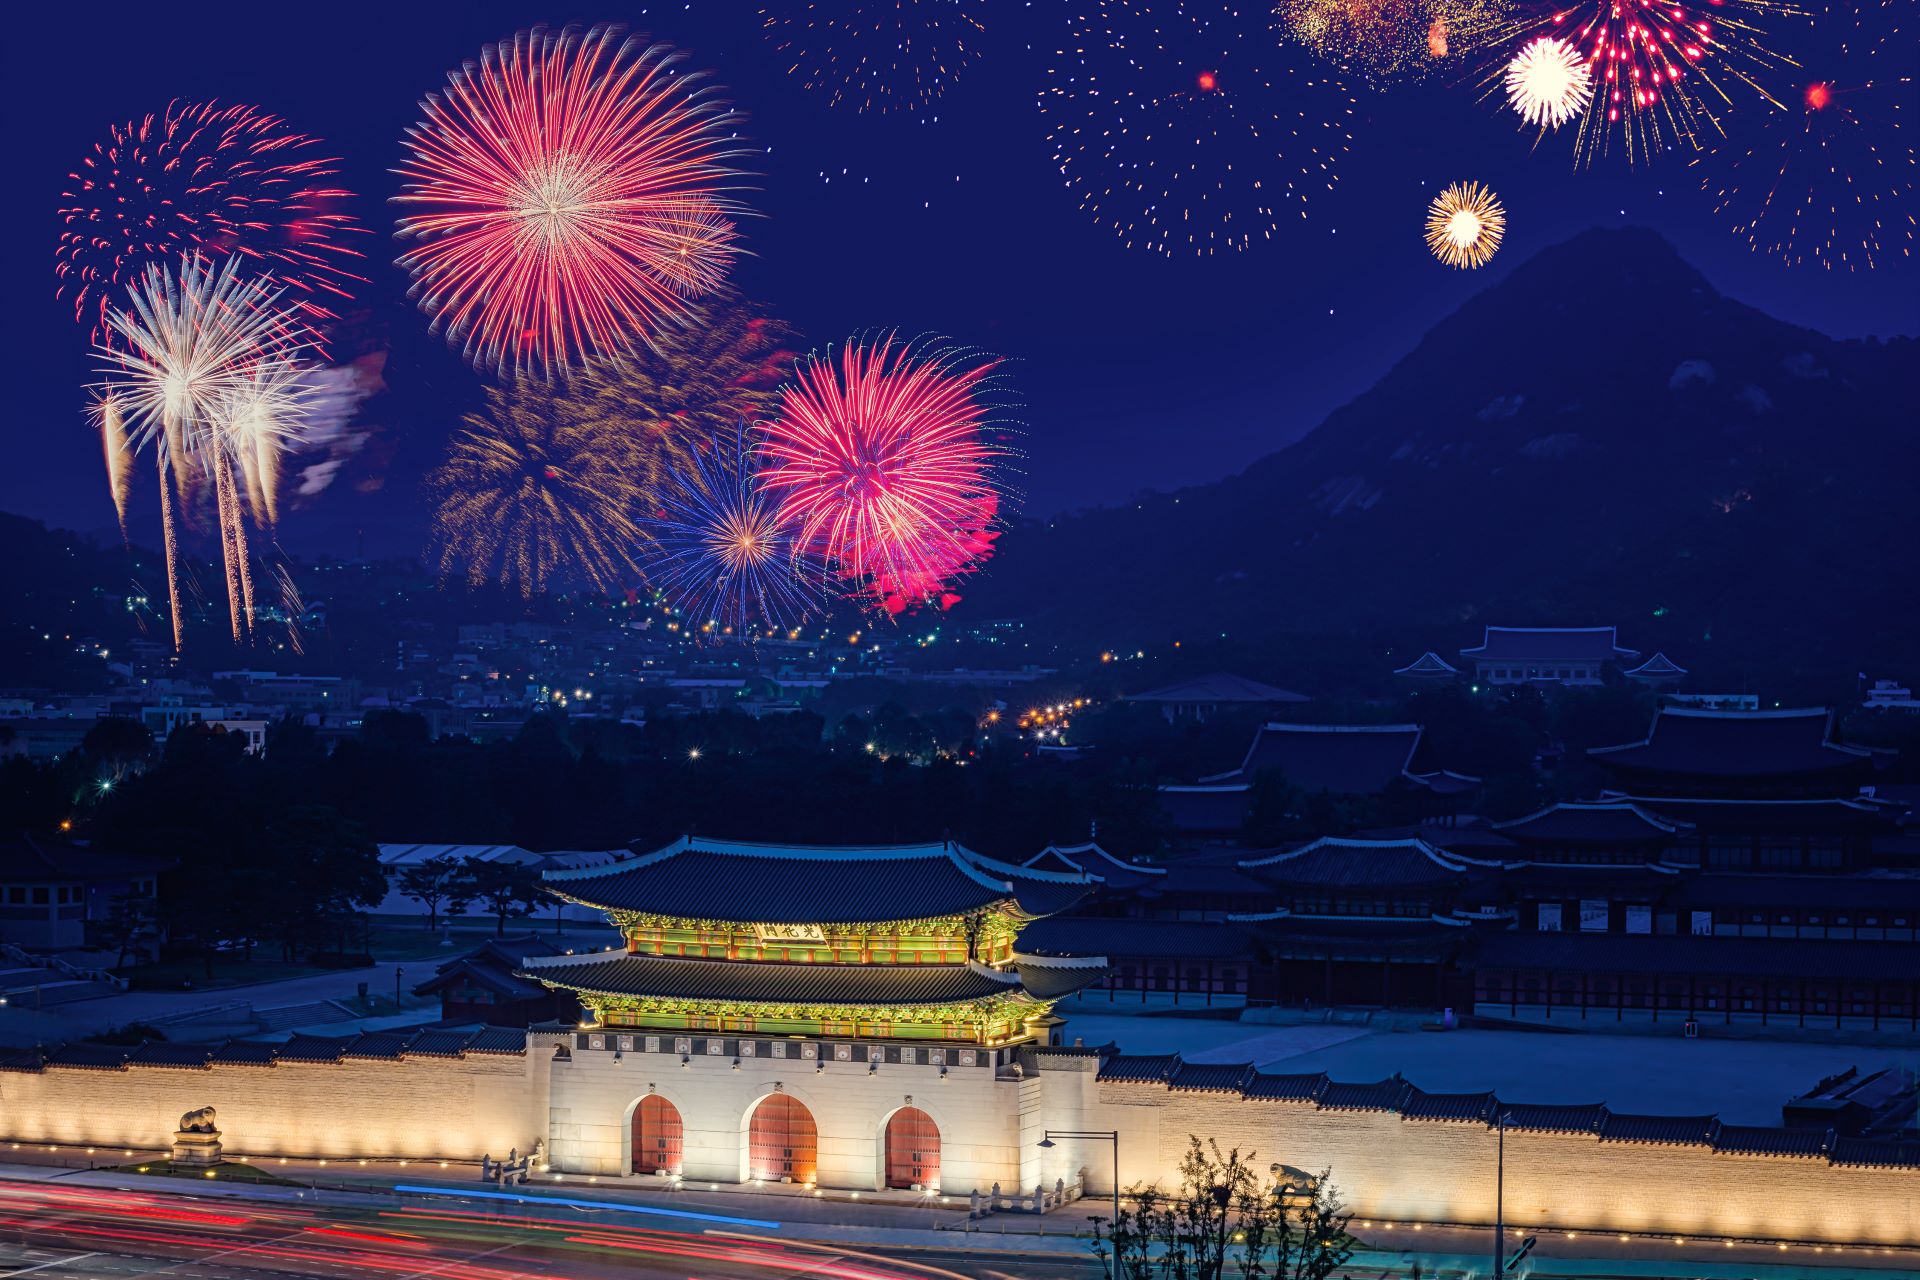 A Korean temple is lit up by fireworks in the sky above, whilst mountains loom in the background.